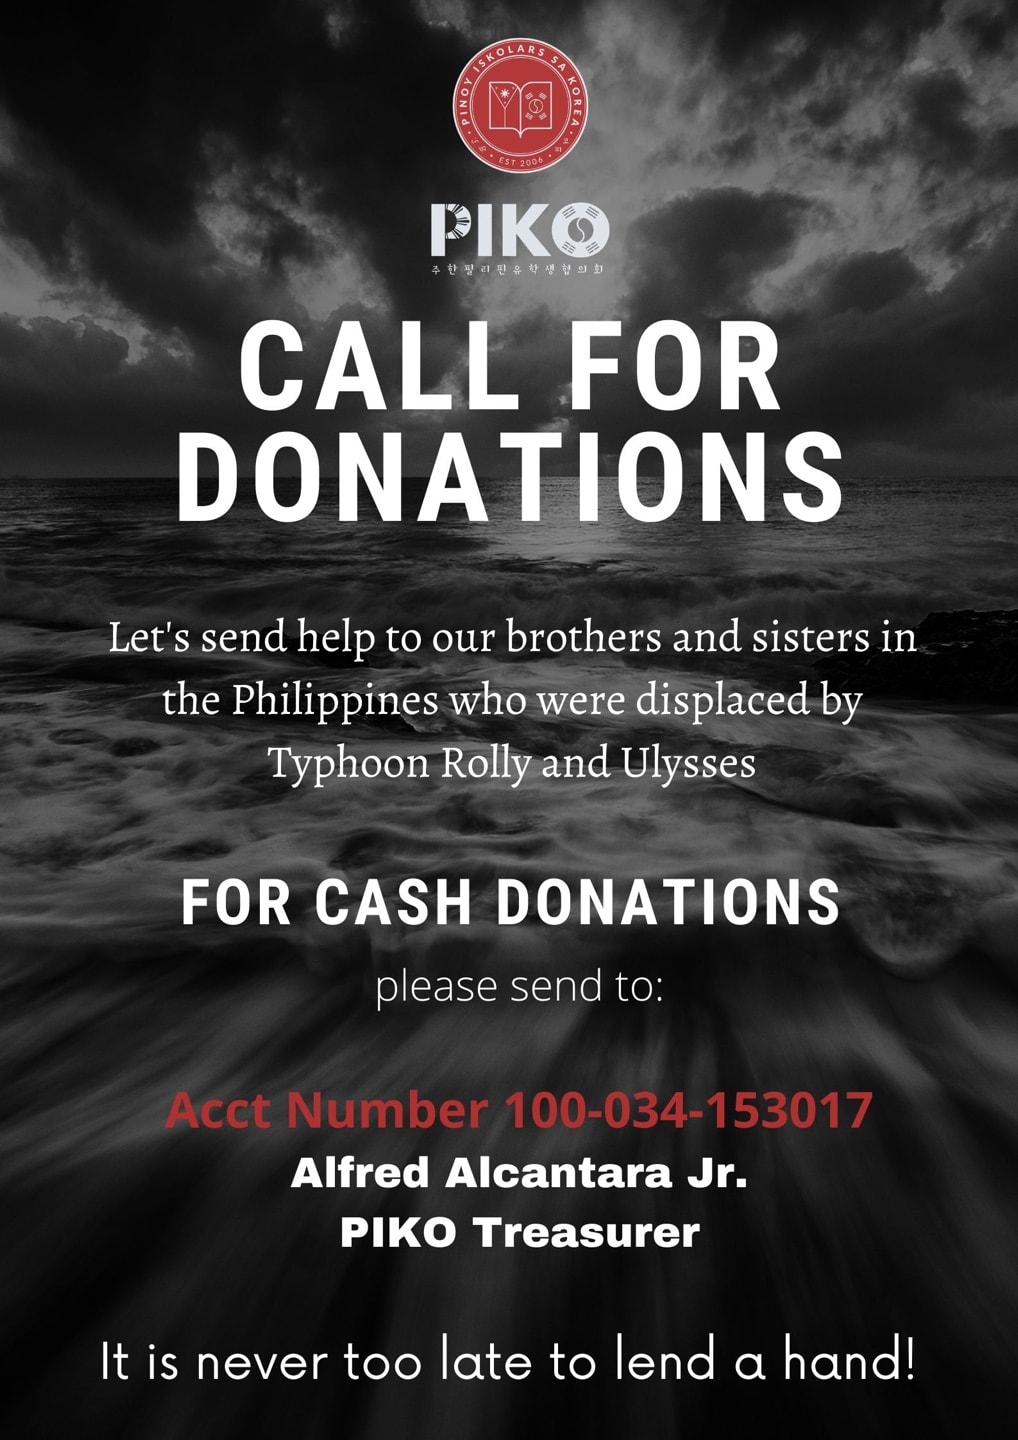 Call for Donations for those affected by Typhoons Rolly and Ulysses